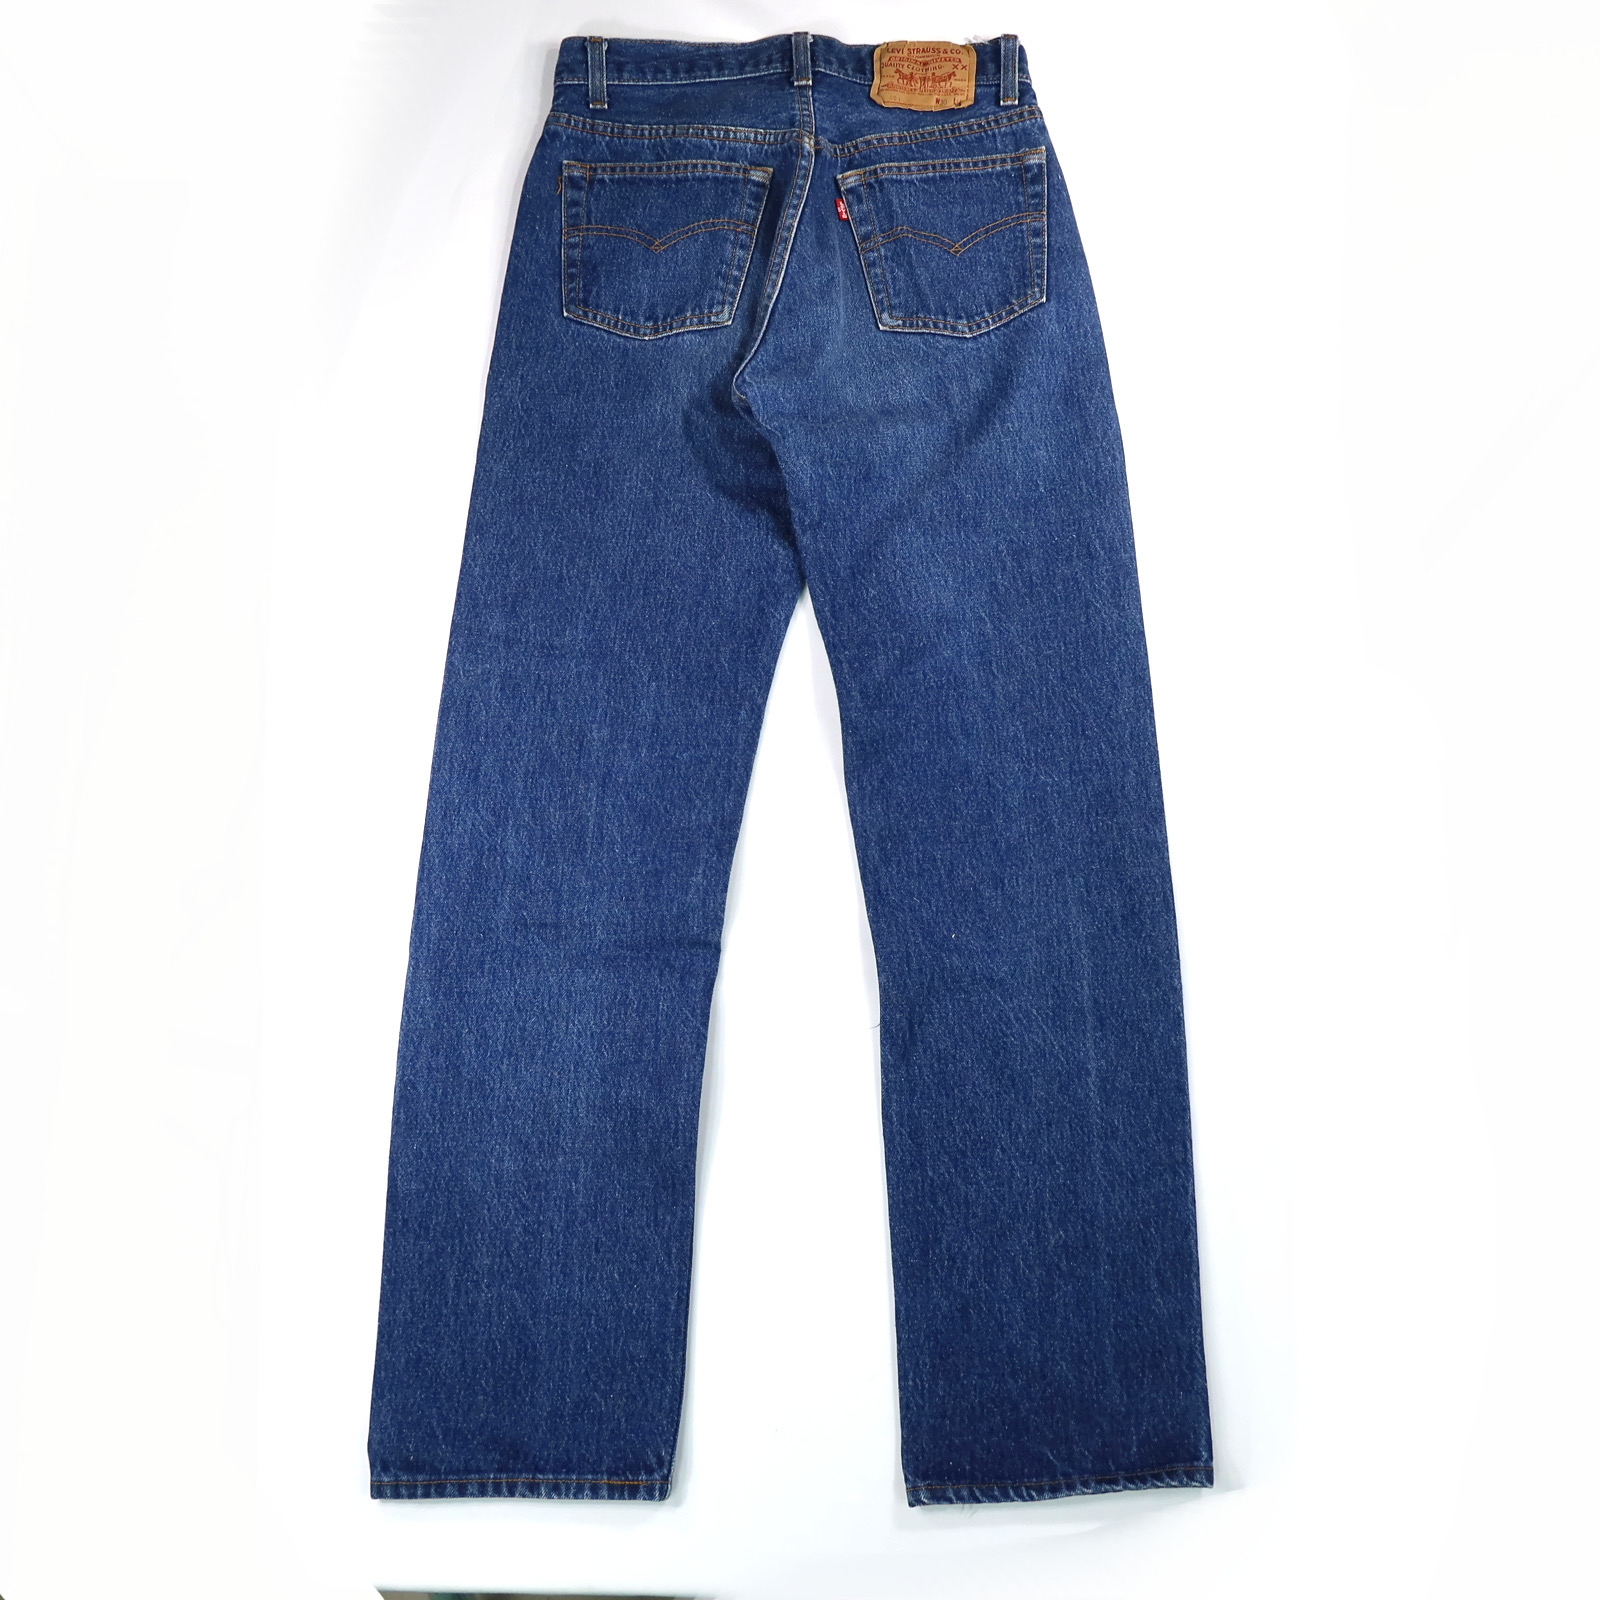 90s Levi's リーバイス501 USA製 W30/エルパソ工場